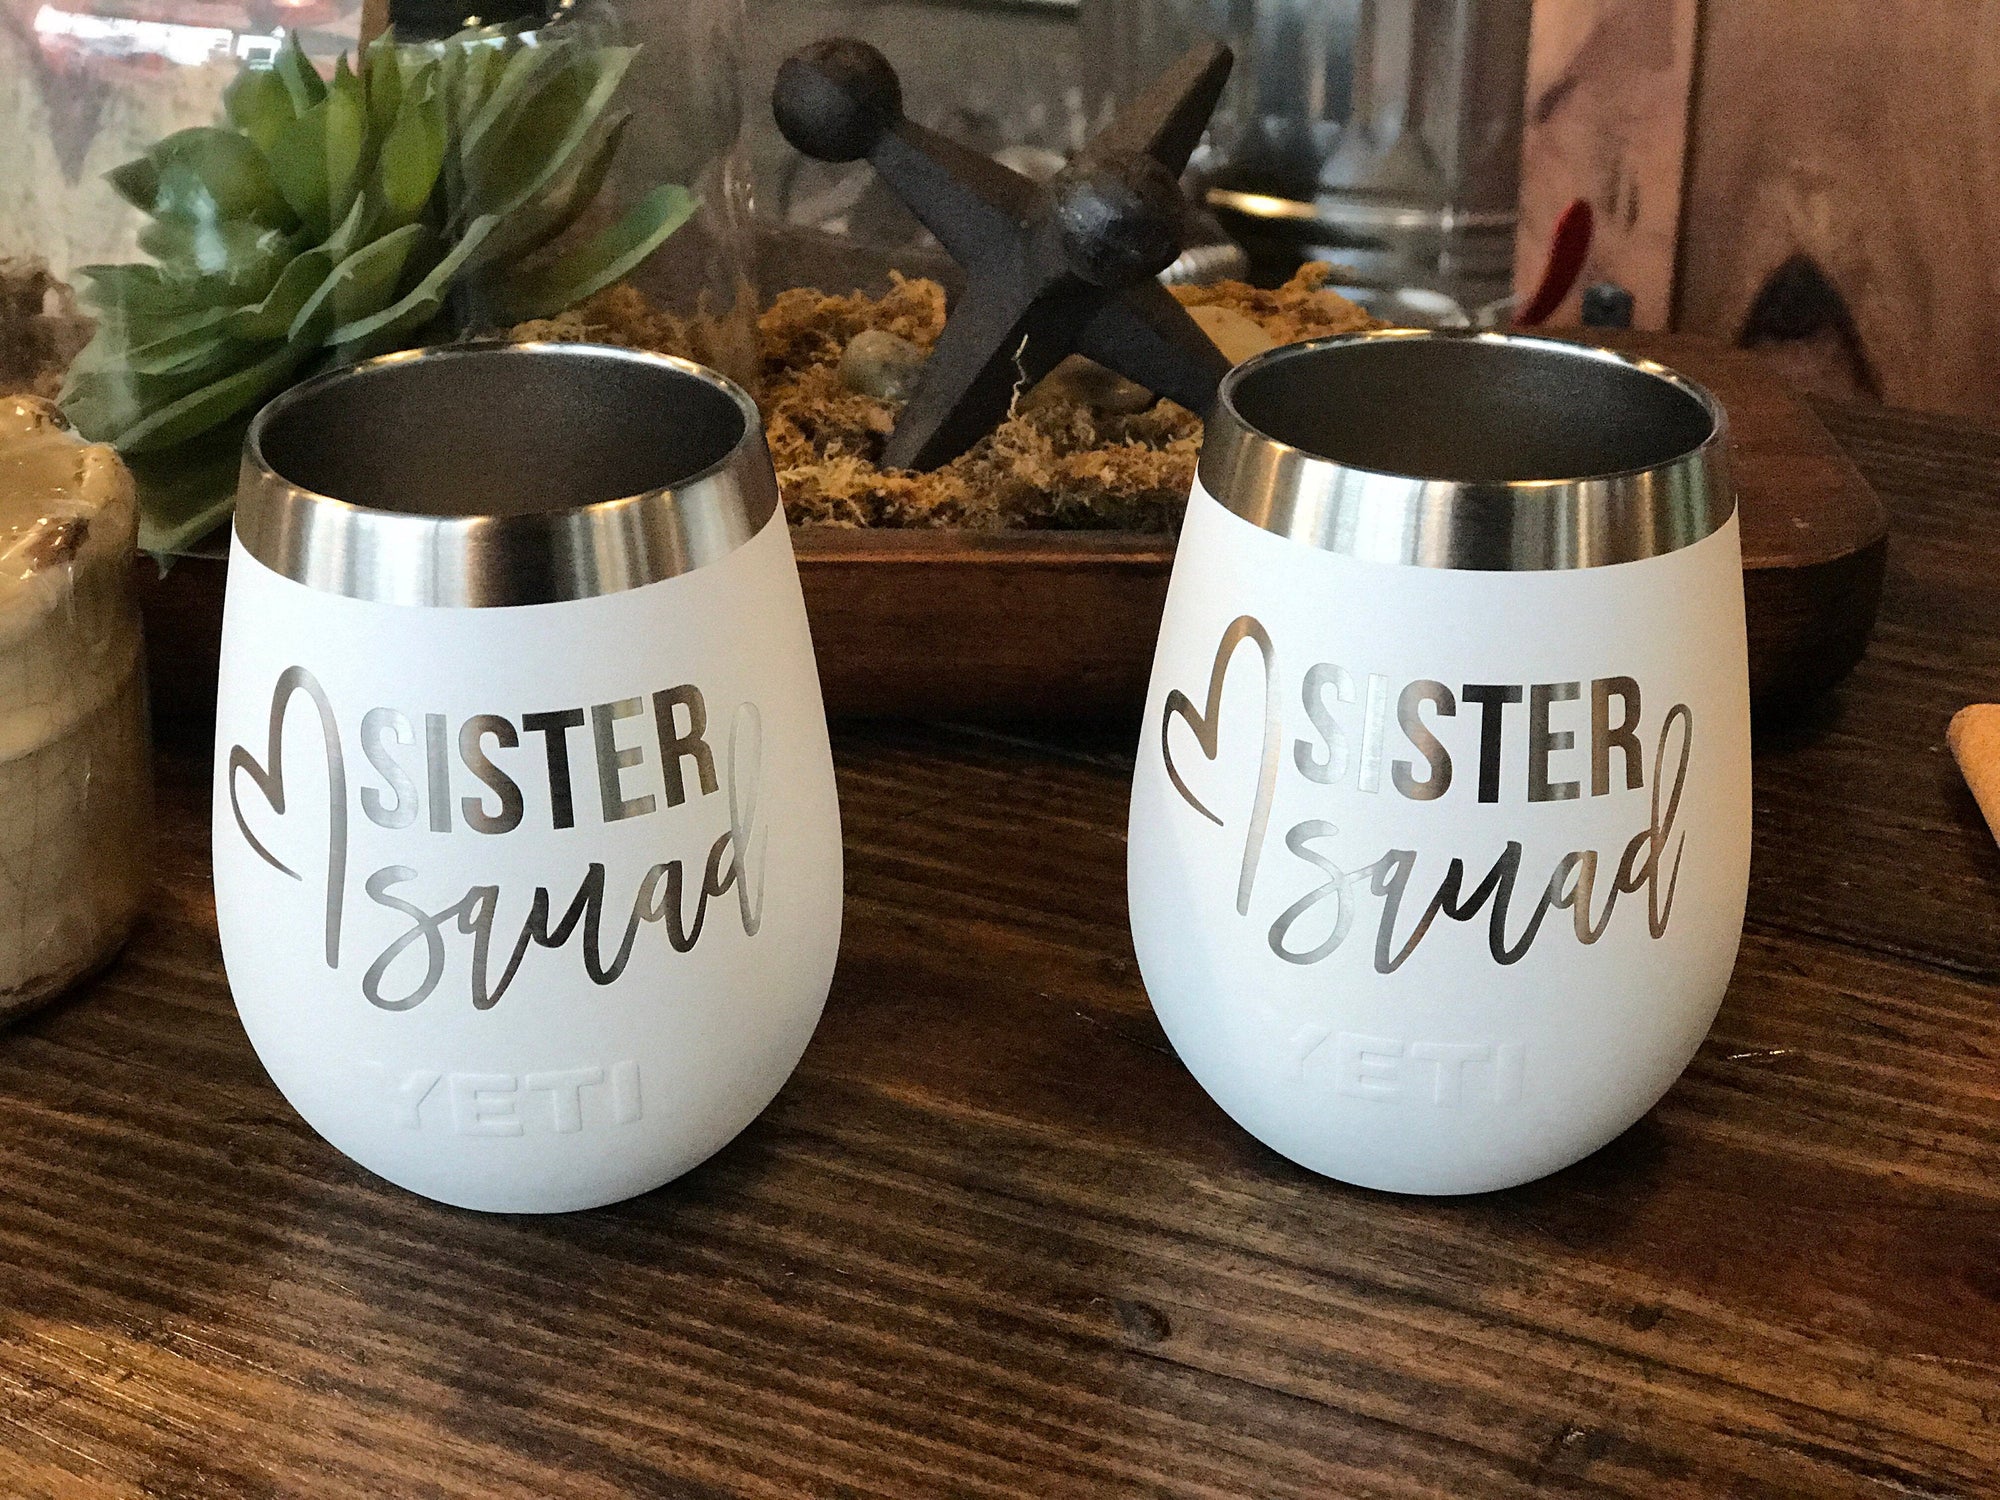 Laser Engraved Yeti Wine Tumbler - Sun, Sand, & a Drink In My Hand